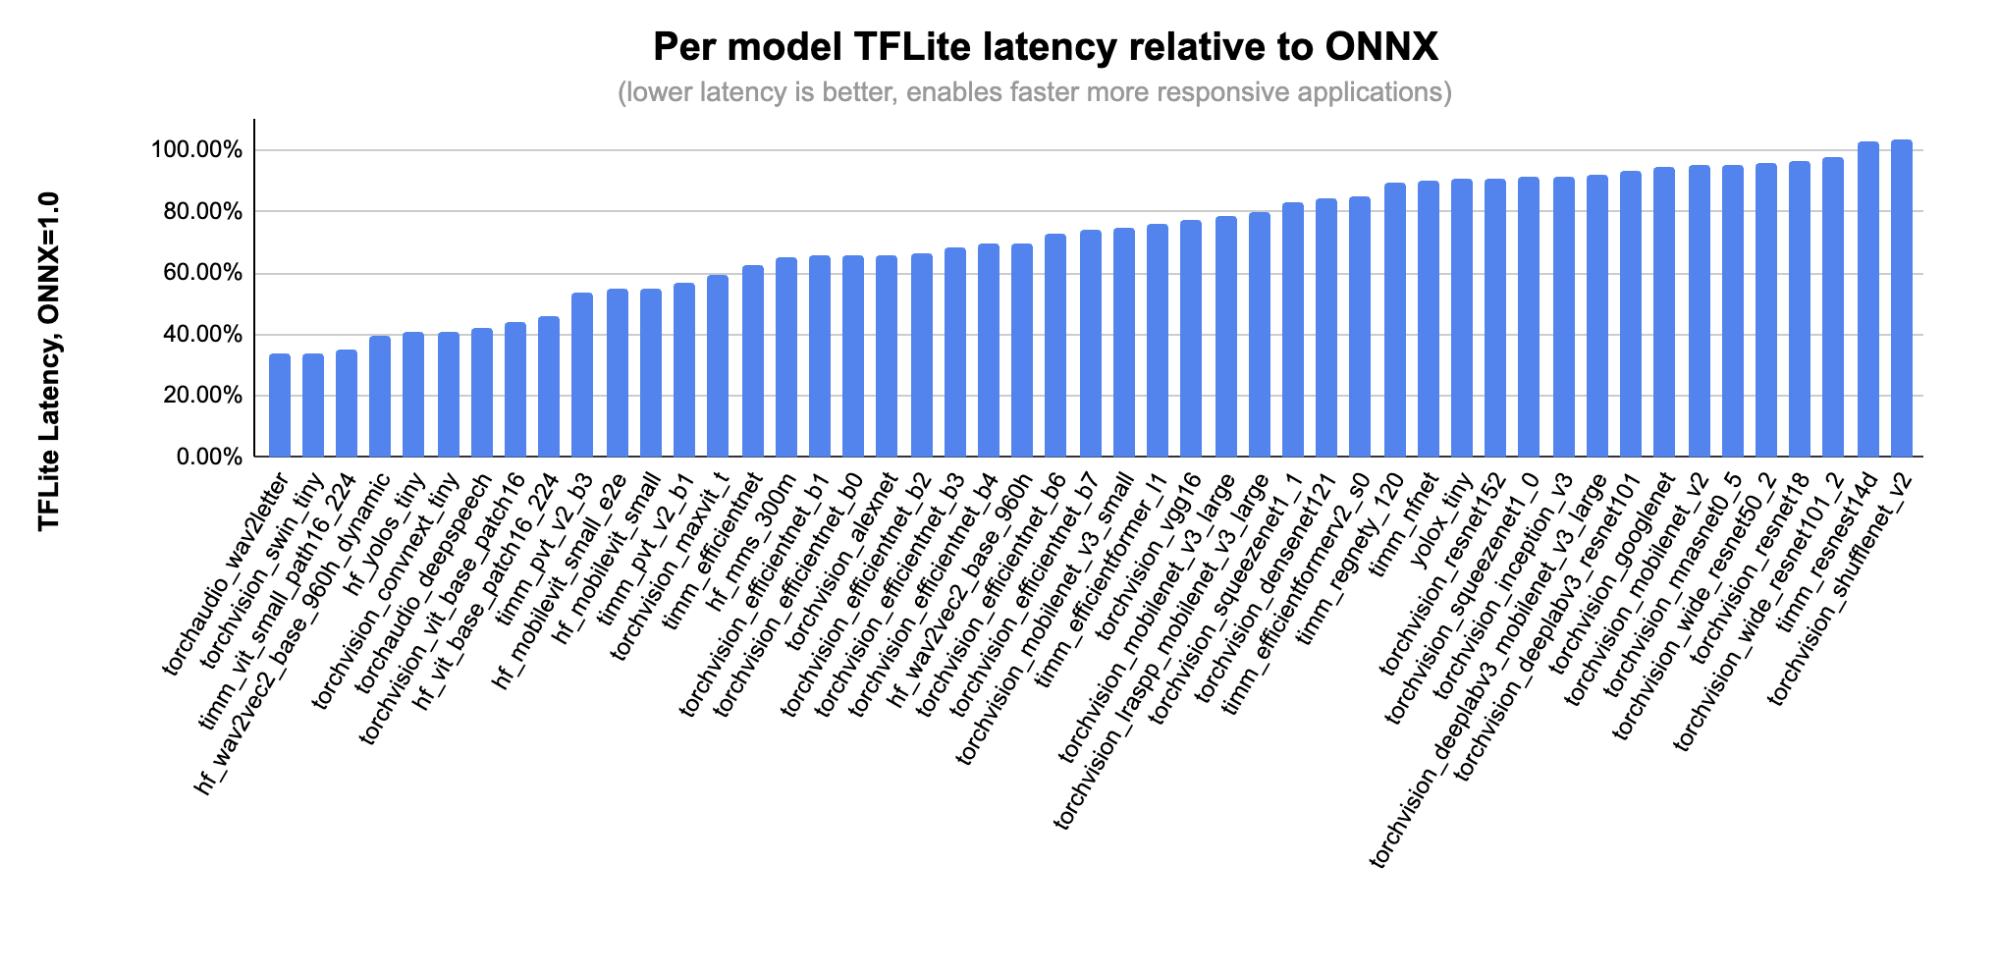 Chart showing per model TFLite latency relative to ONNX